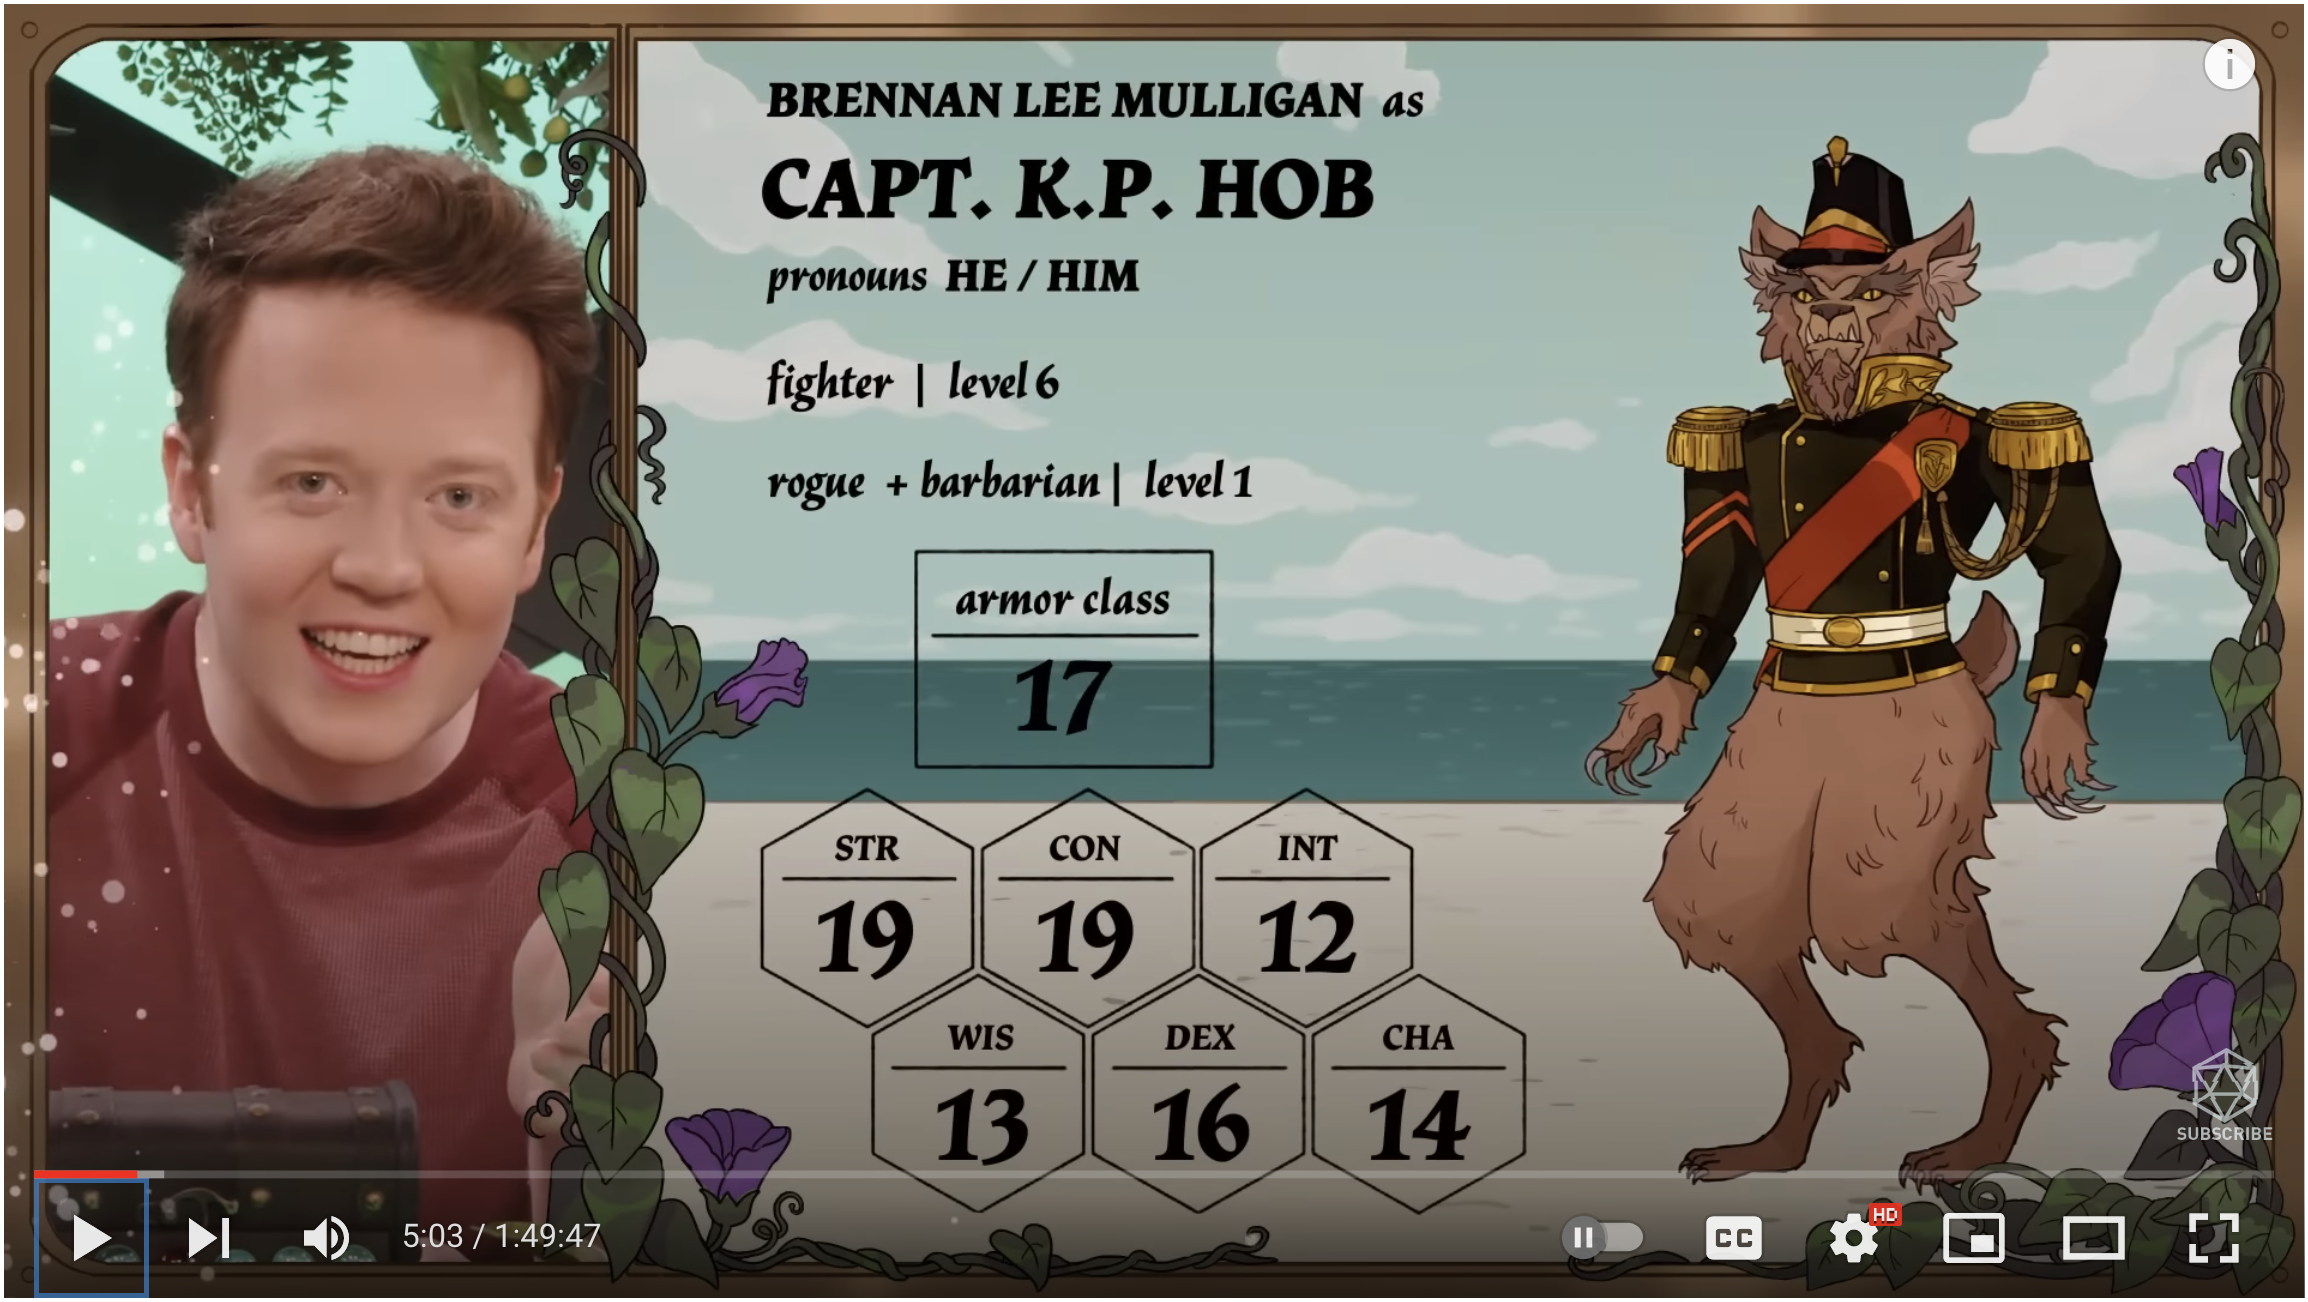 Brennan Lee Mulligan plays Captain KP Hob in Dimension 20's A Court of Fey & Flowers